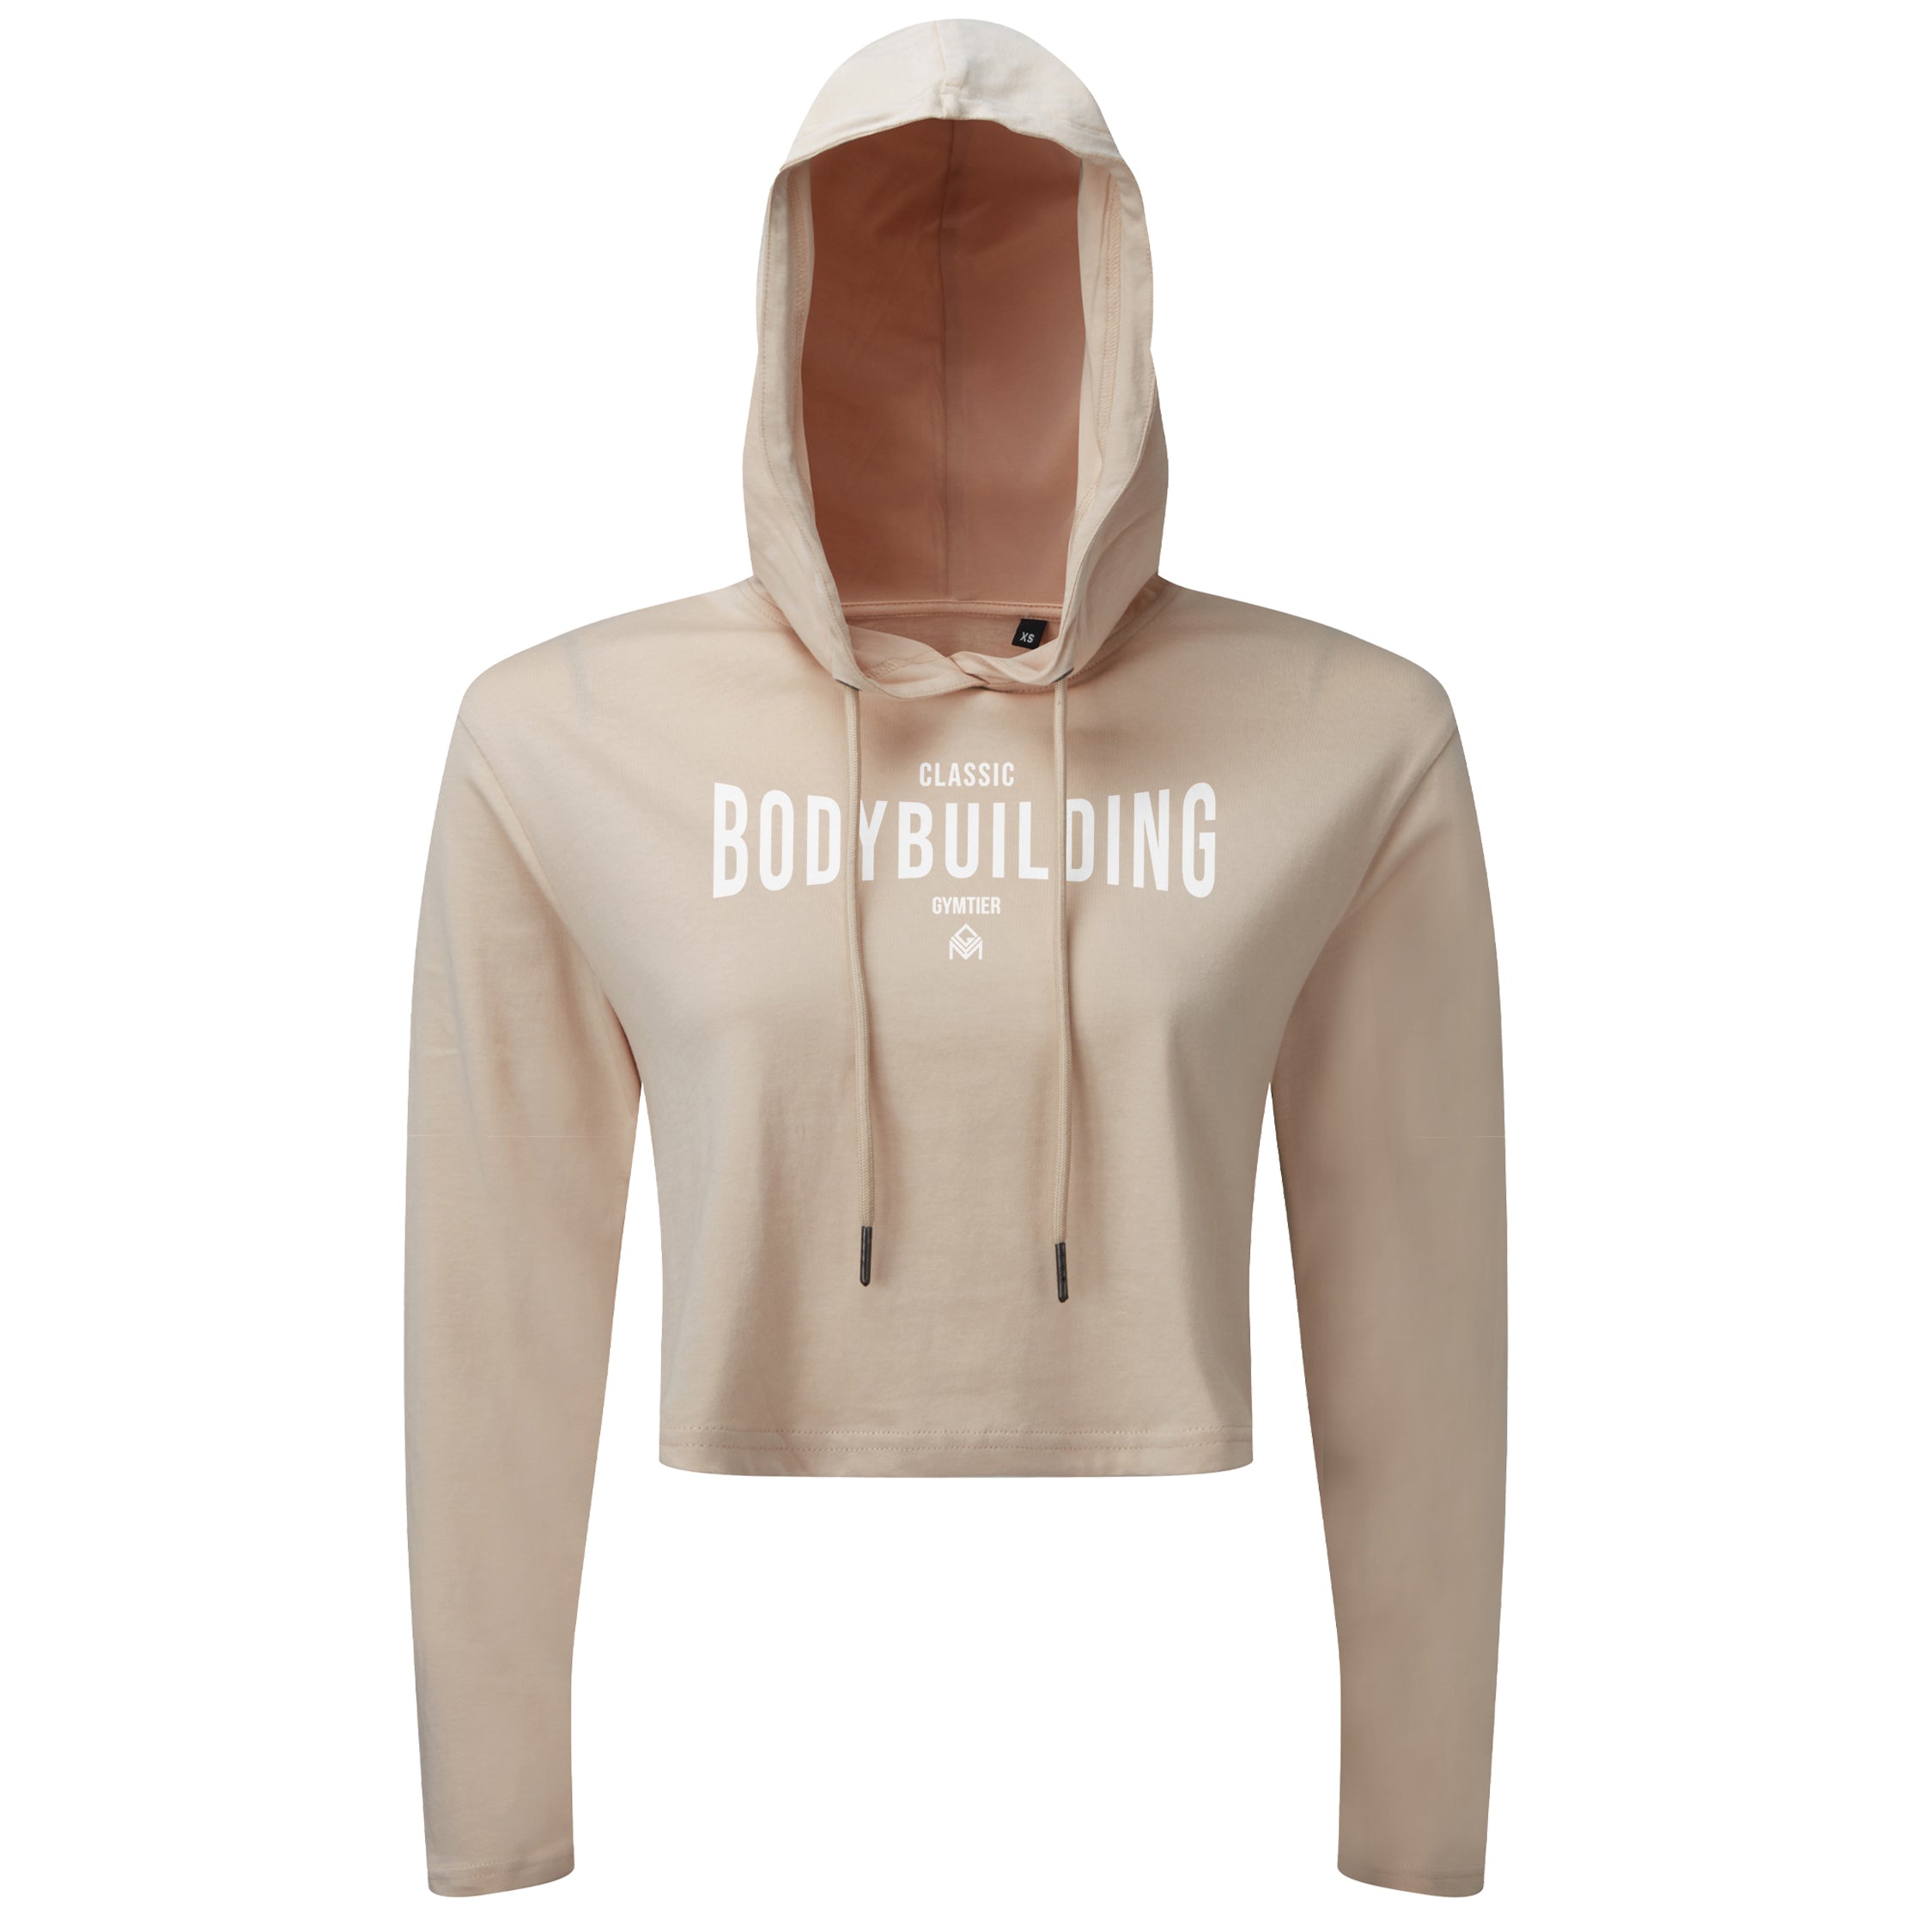 Classic Bodybuilding - Cropped Hoodie